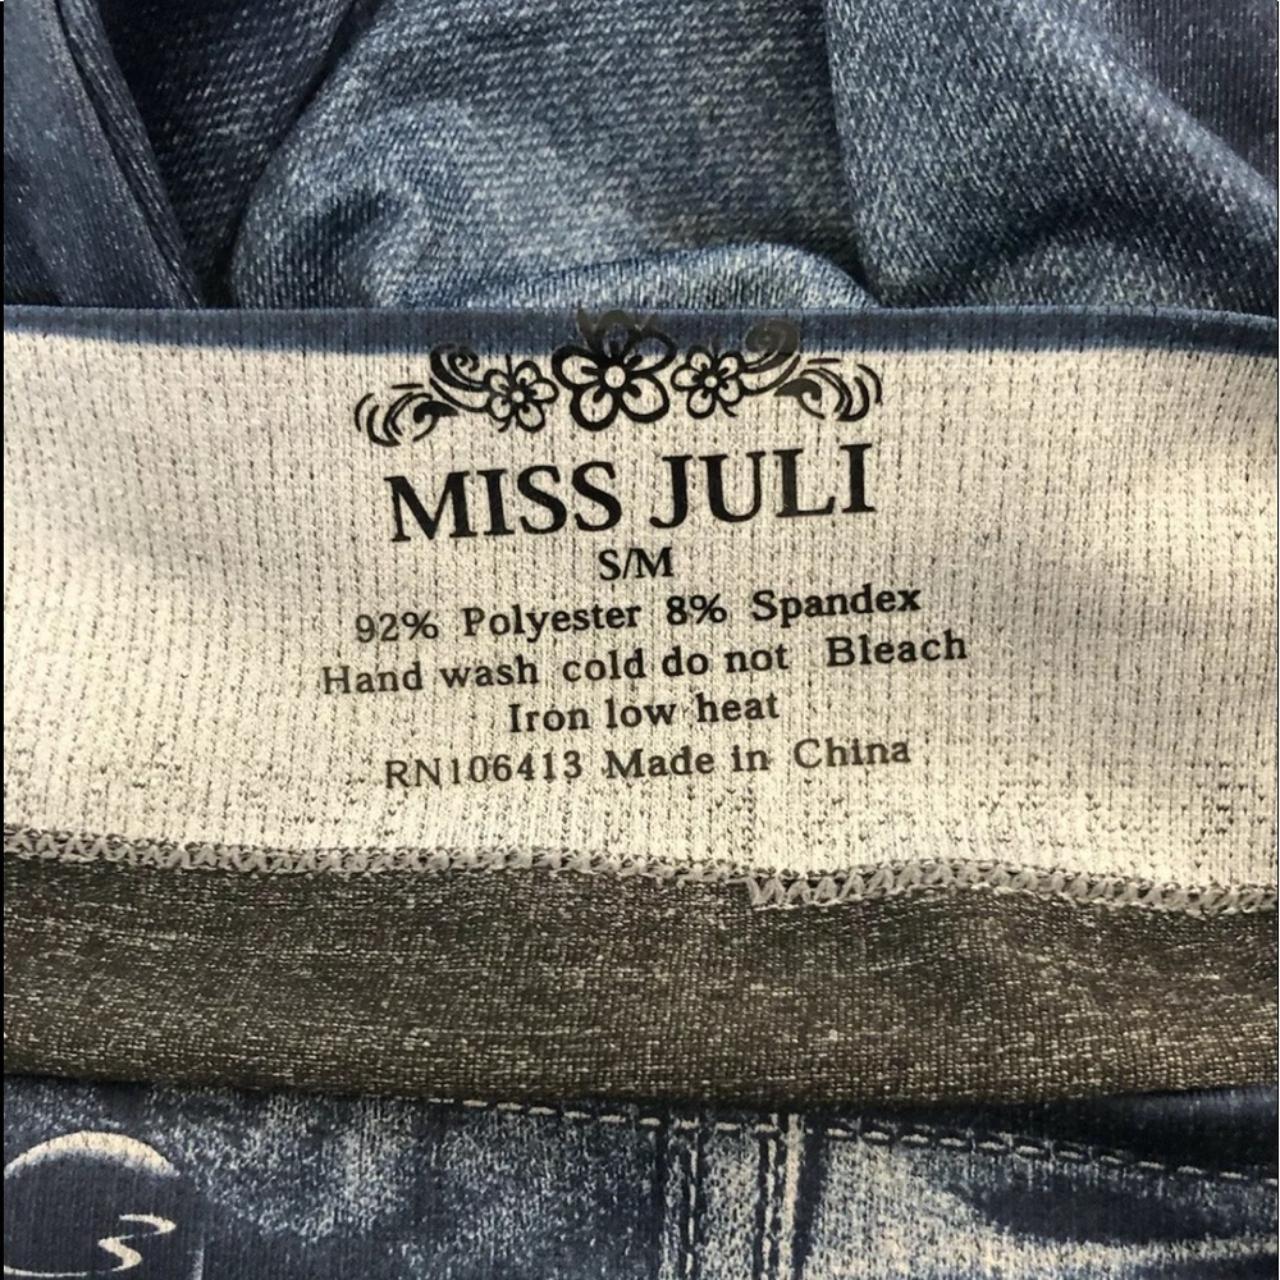 Product Image 4 - Miss juli s/m
Love that jeans